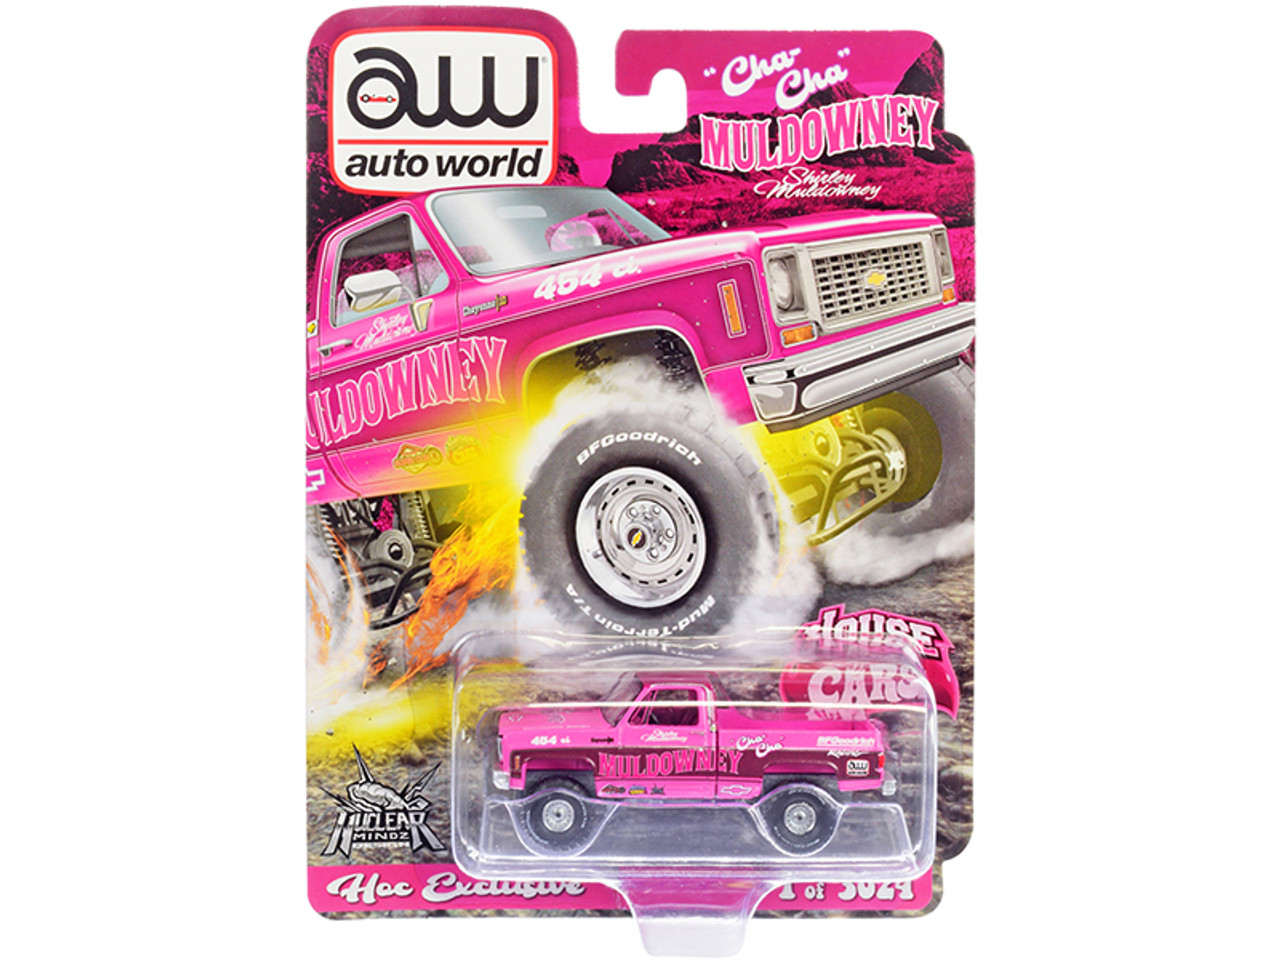 Chevrolet Cheyenne 10 Pickup Truck Pink with Graphics "Cha Cha" Shirley Muldowney "Las Vegas Diecast Super Convention" (2022) Limited Edition to 3024 pieces Worldwide 1/64 Diecast Model Car by Auto World